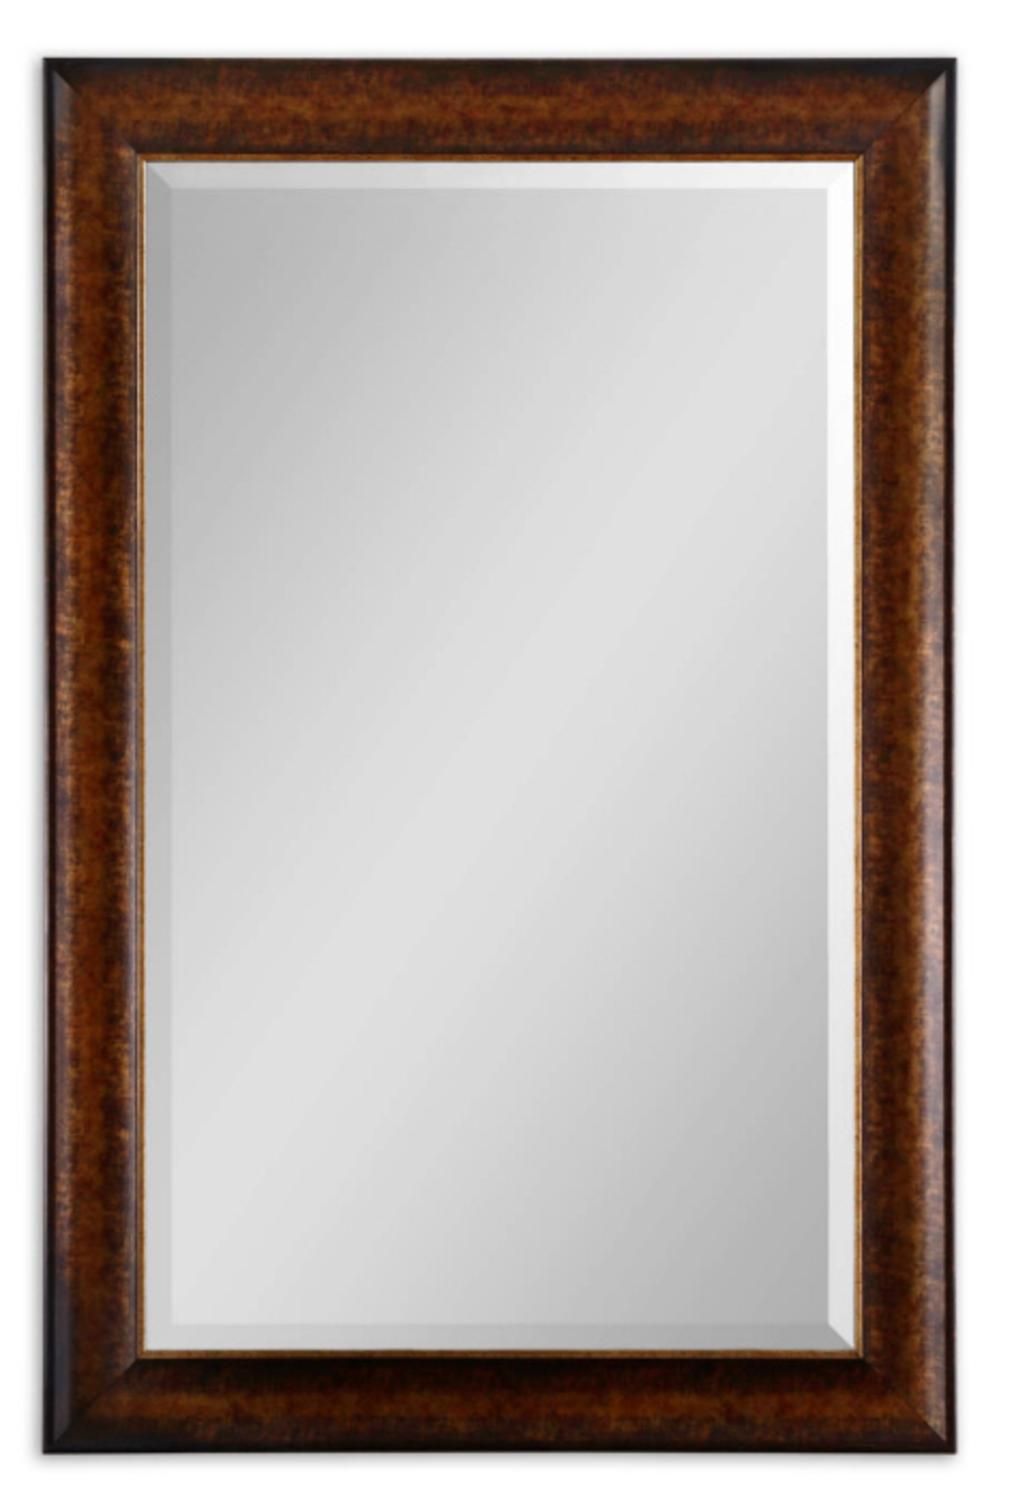 58" Rustic Bronze With Silver Tones Framed Beveled Rectangular Wall Regarding Silver Beveled Wall Mirrors (View 11 of 15)